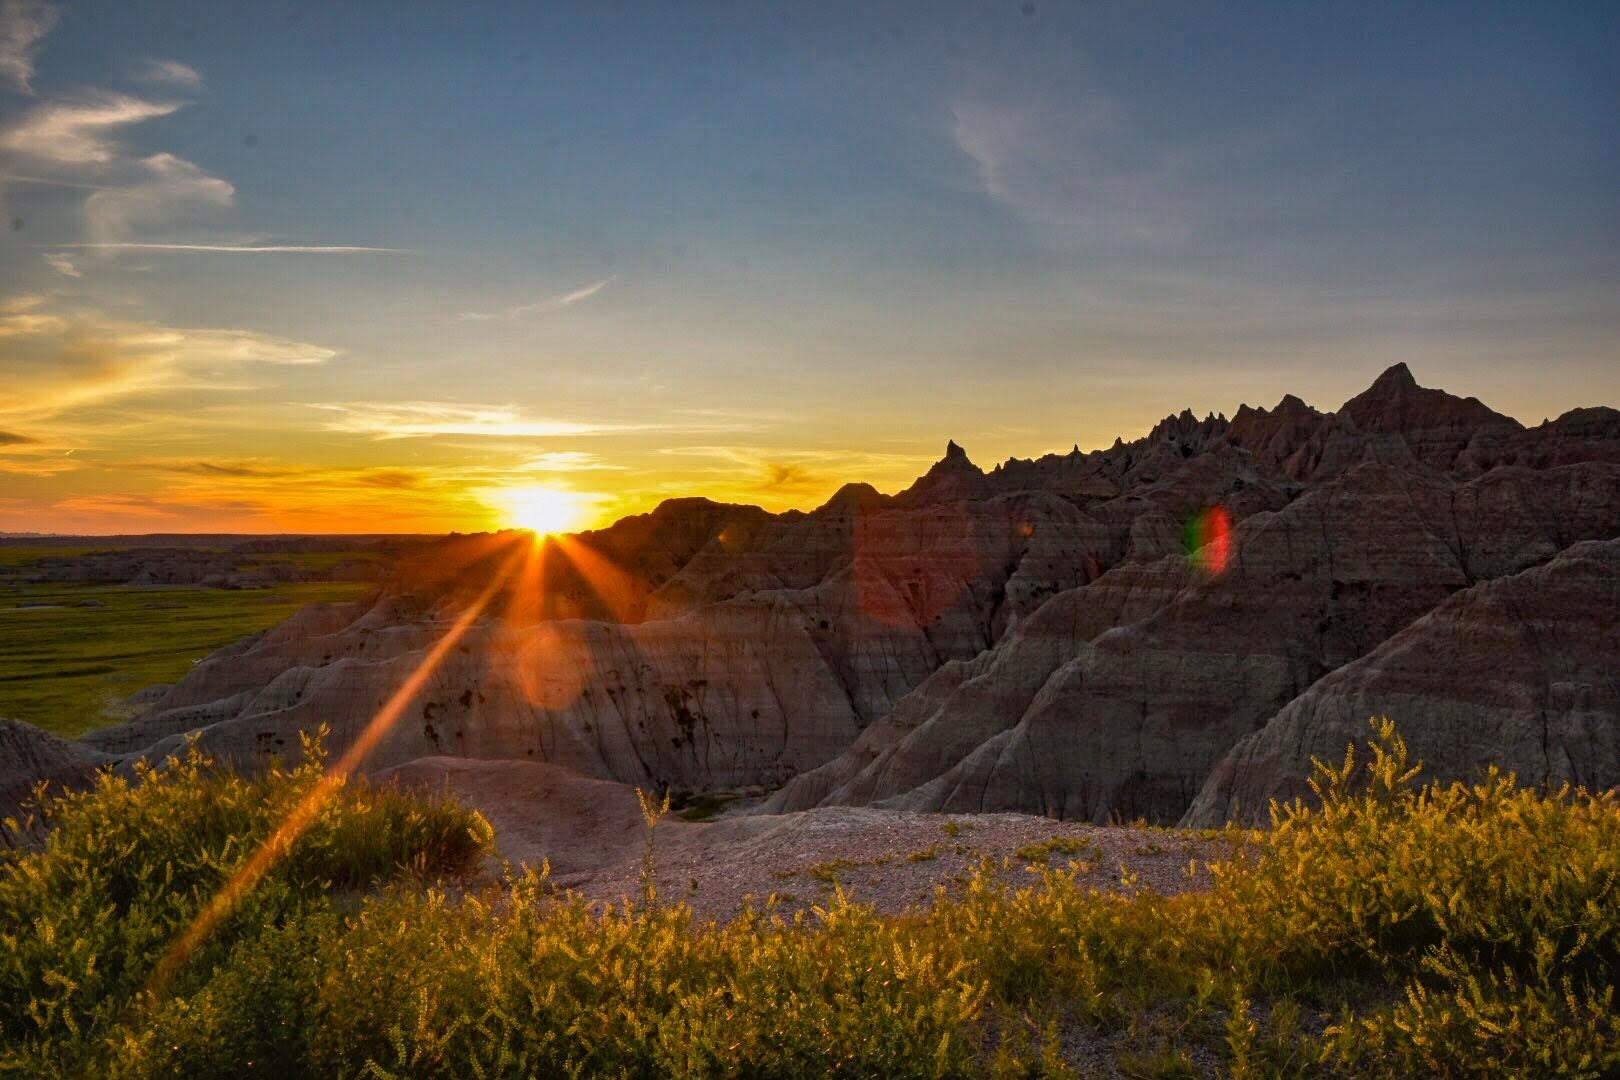 Sunsetting over the rock formations in the badlands in front of a wildflowers.